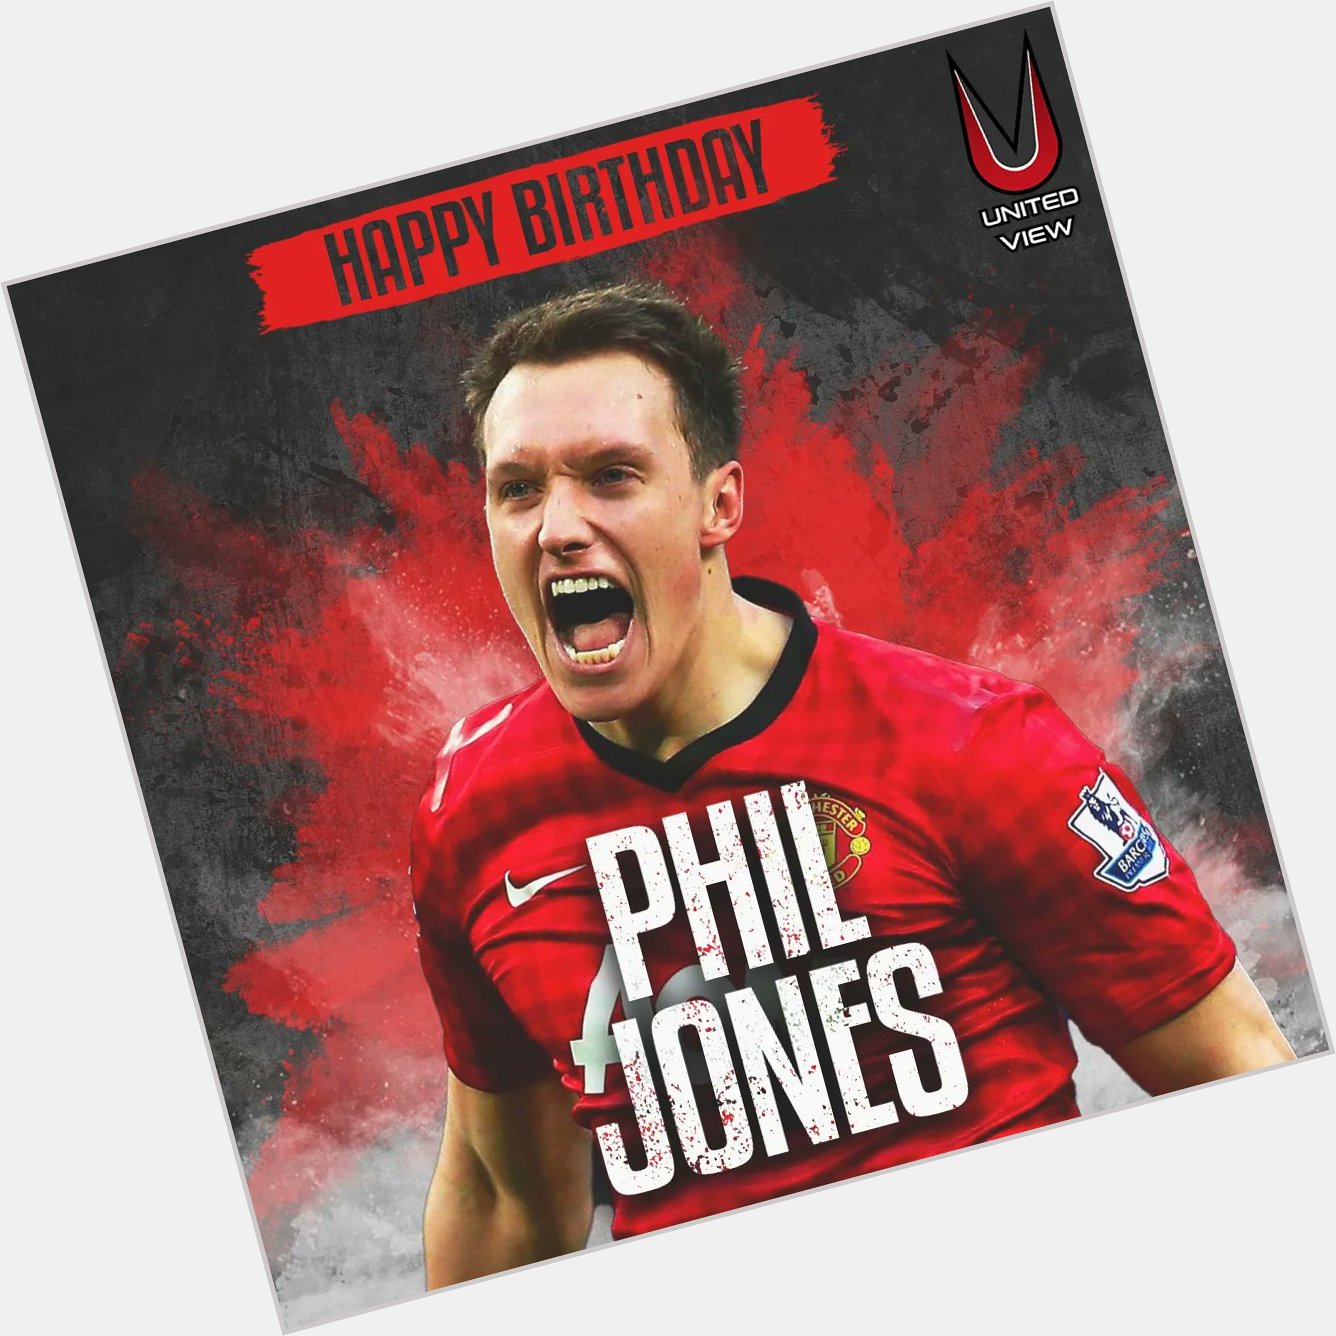 Happy Birthday to Phil Jones!

The Manchester United defender turns 30 years old today   